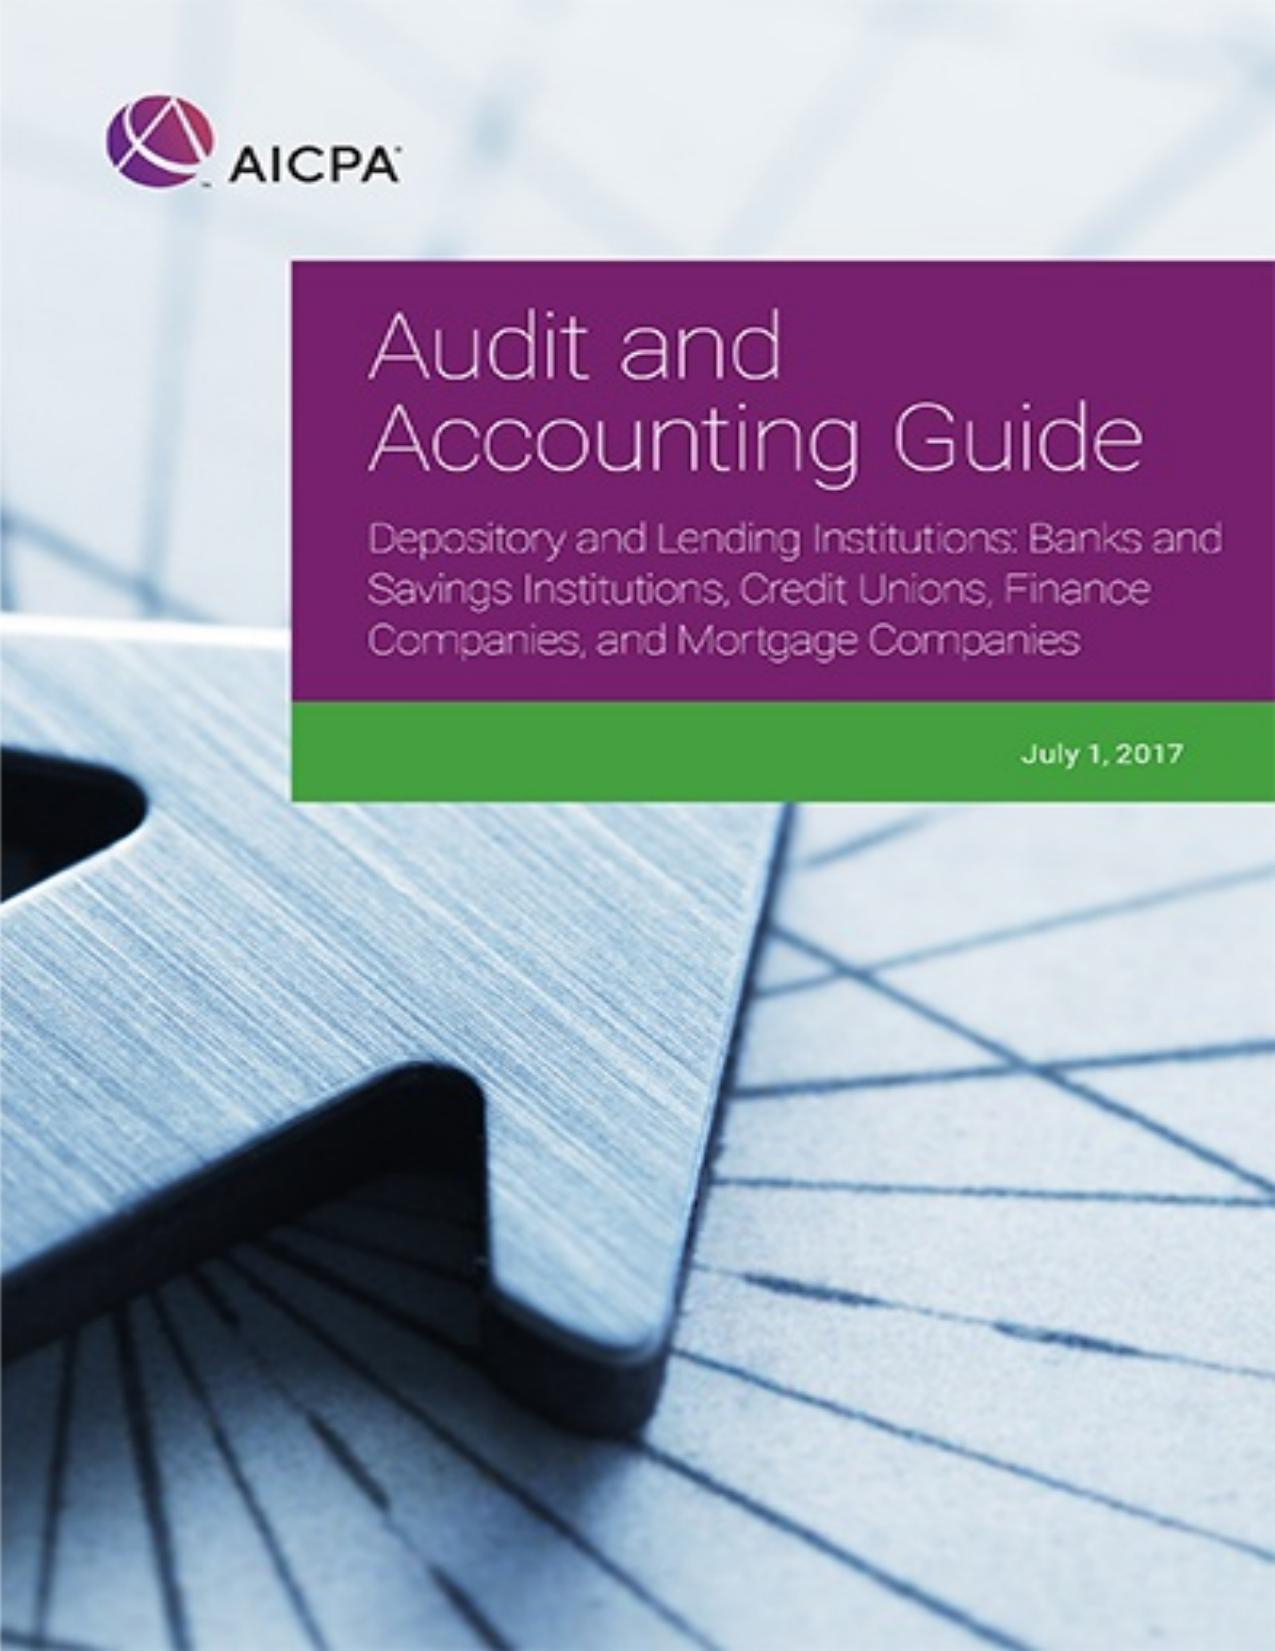 Audit and Accounting Guide: Depository and Lending Institutions: Banks and Savings Institutions, Credit Unions, Finance Companies, and Mortgage Companies